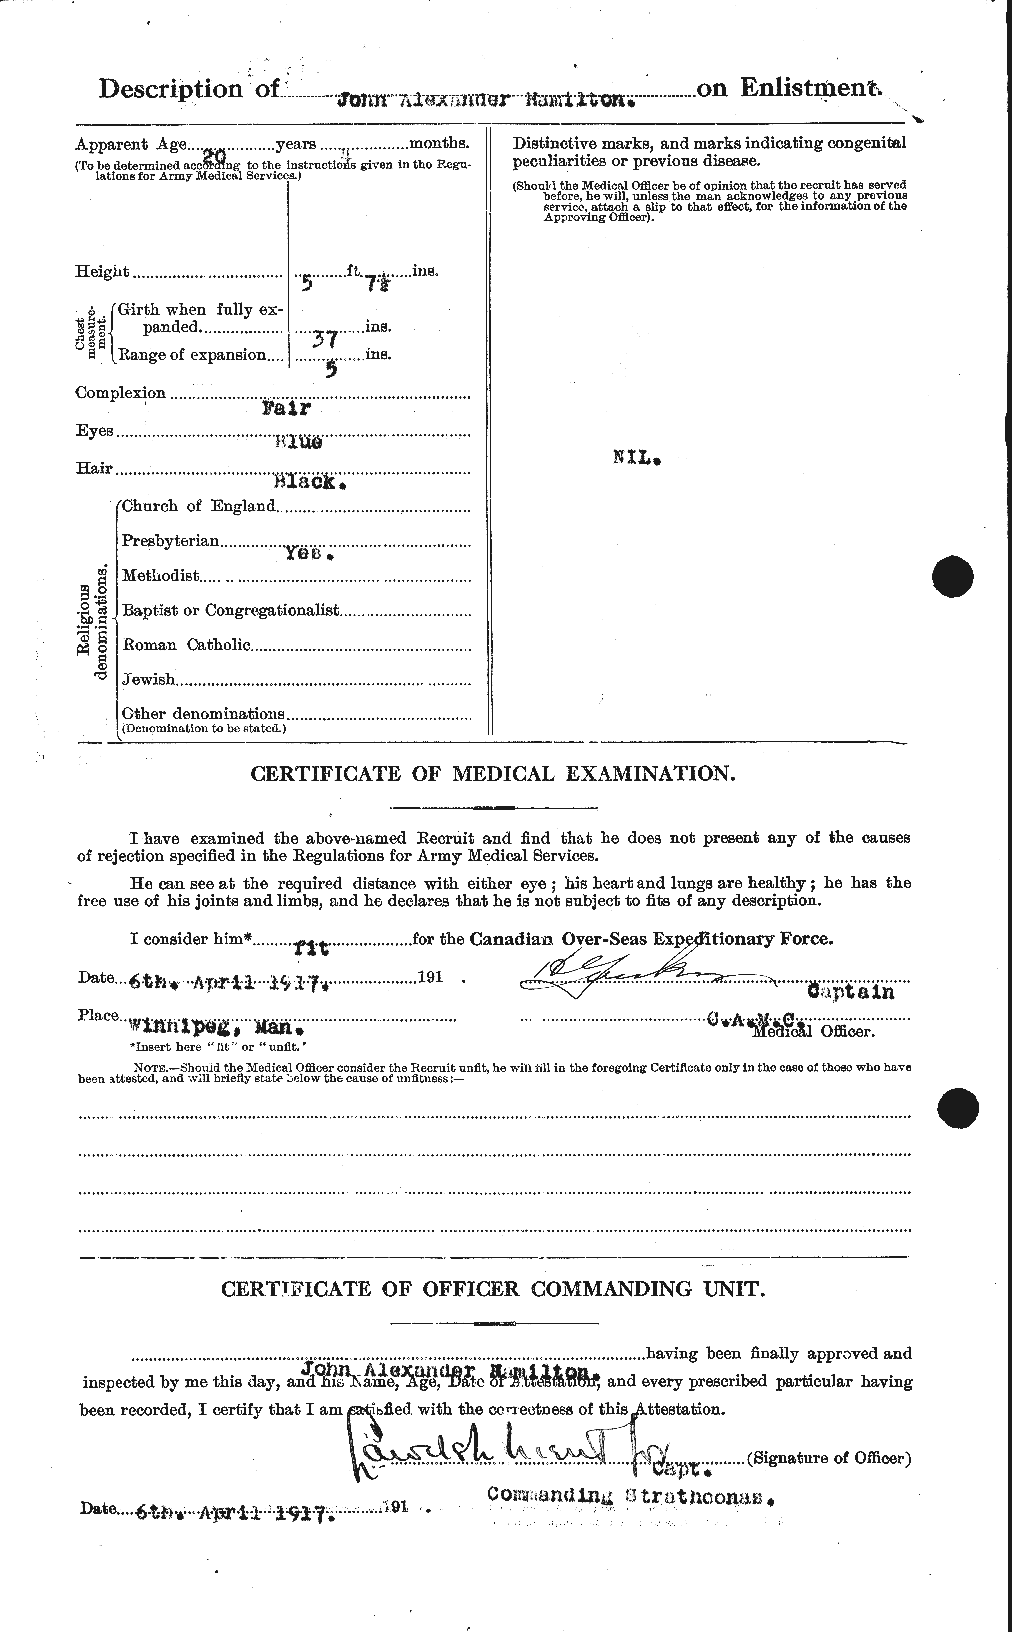 Personnel Records of the First World War - CEF 373065b